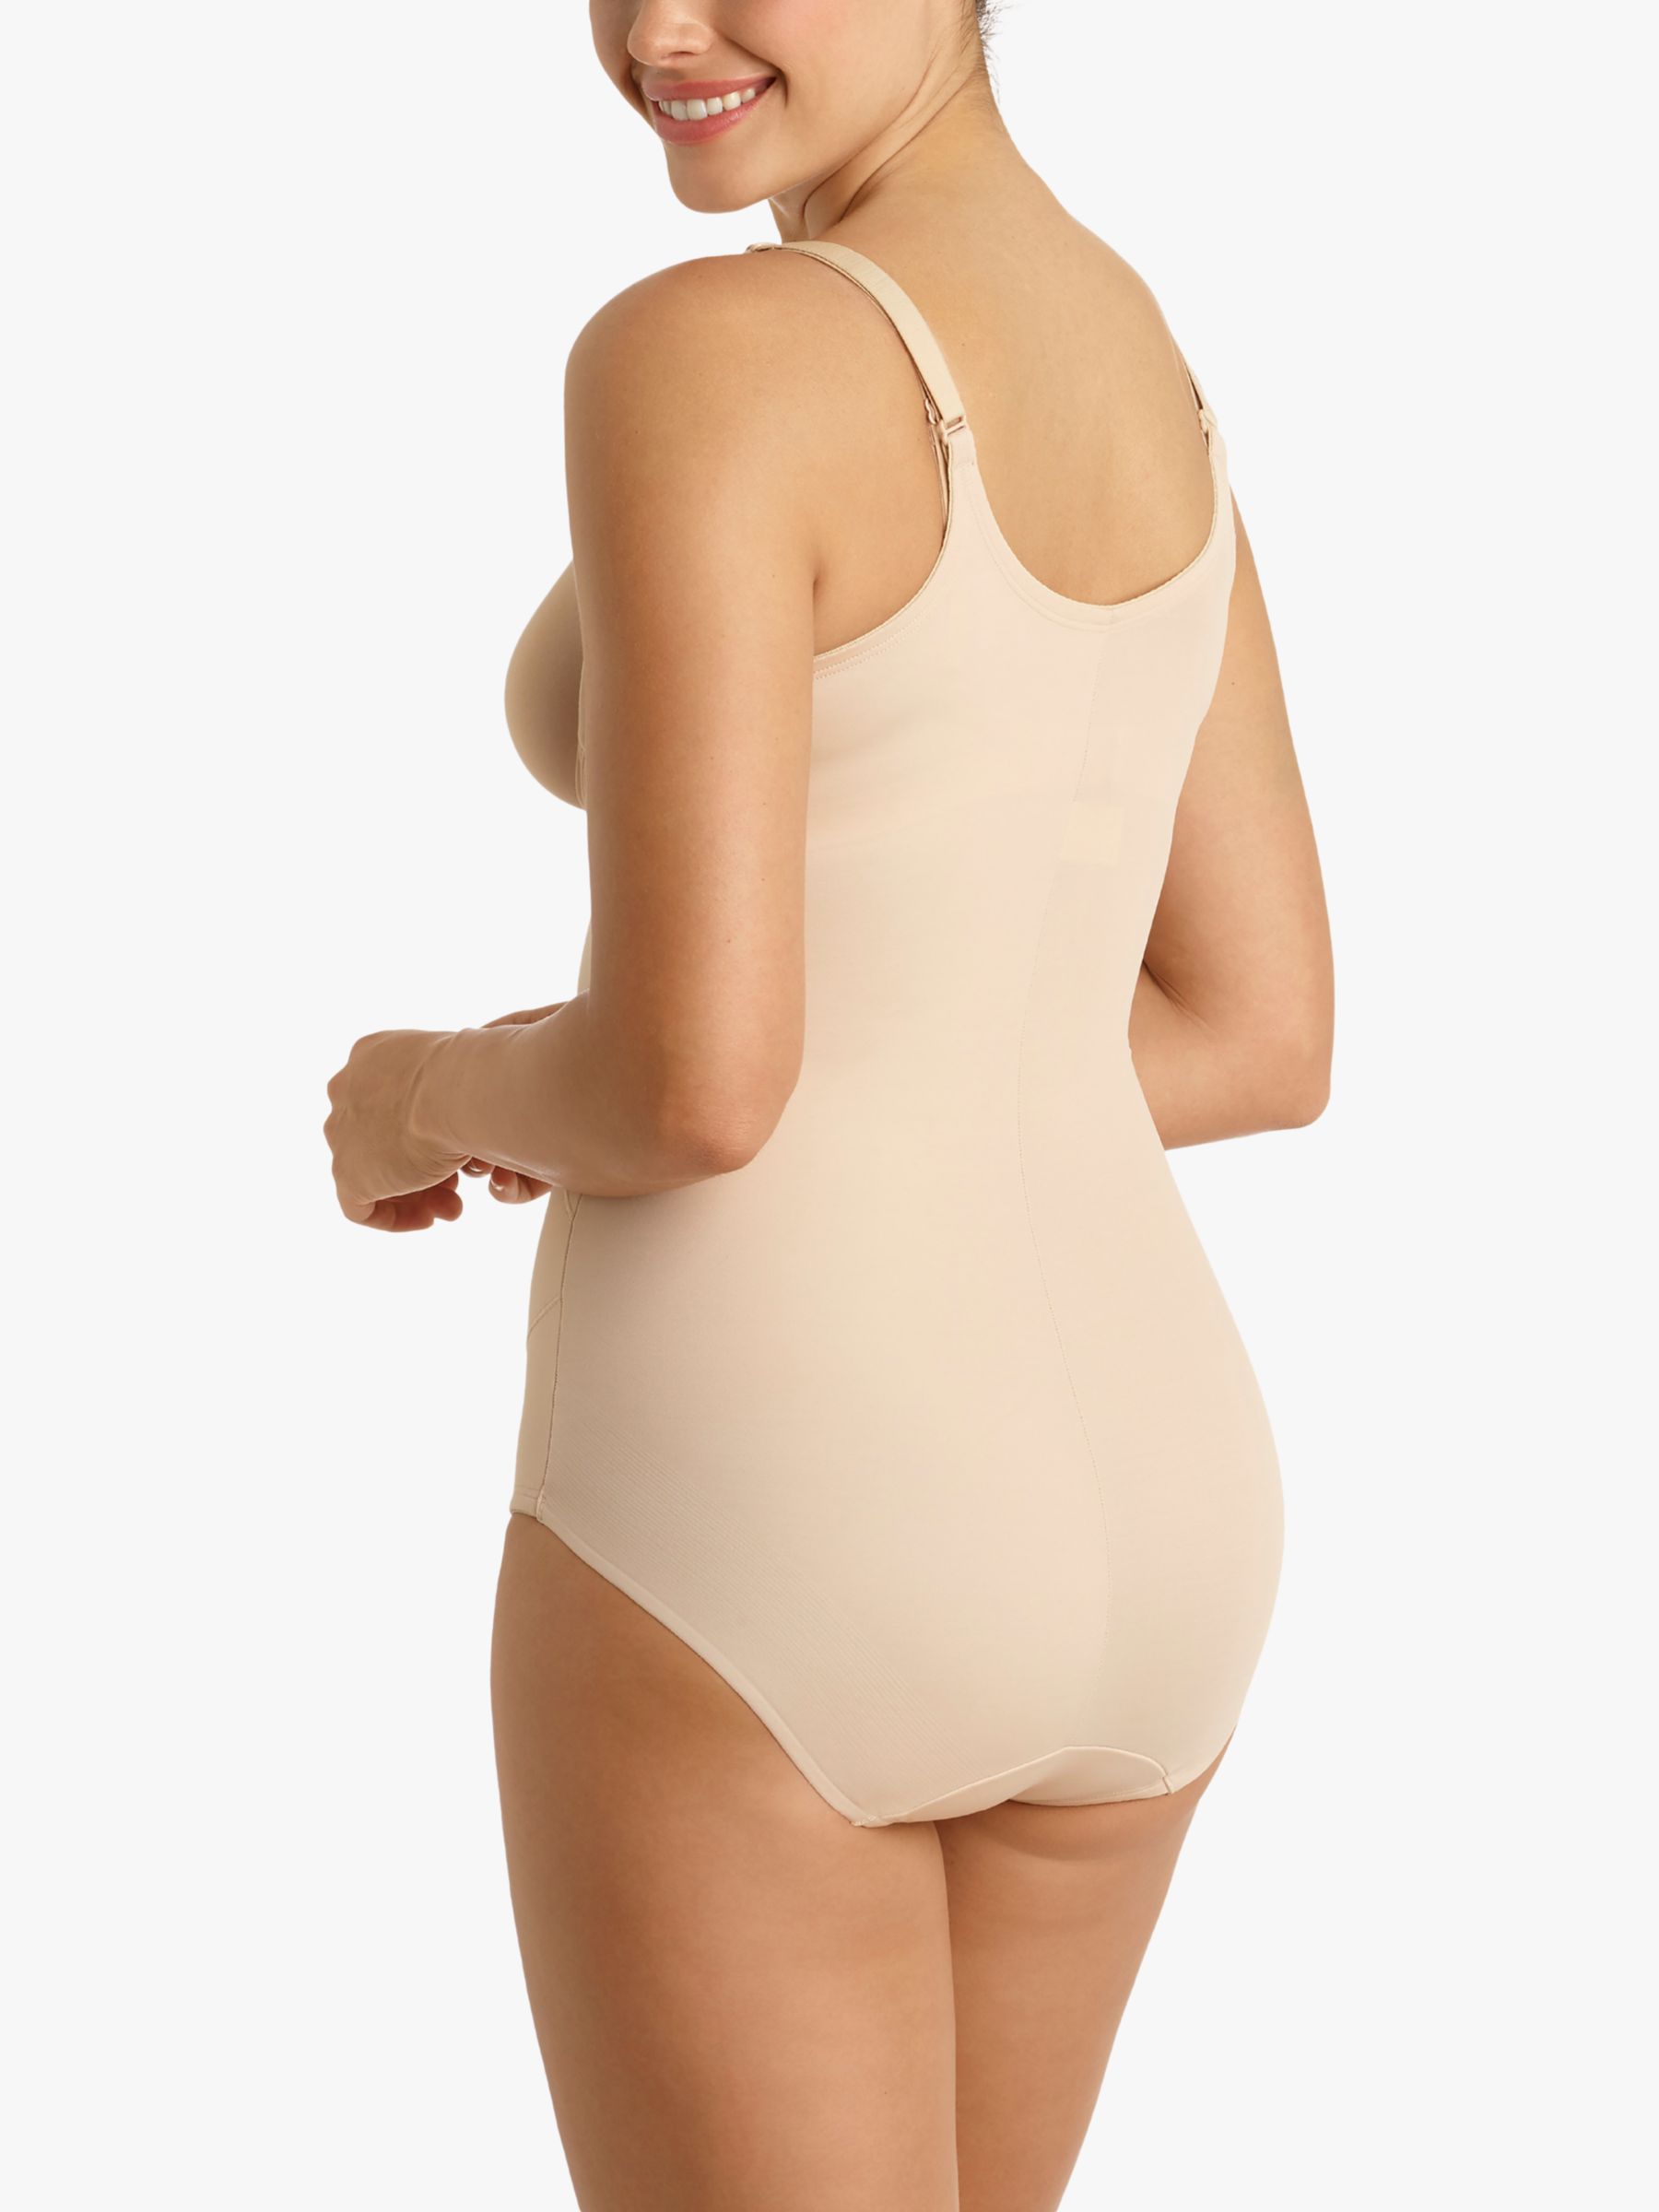 Miraclesuit Women's Tummy Tuck Extra-Firm Open-Bust Mid-Thigh